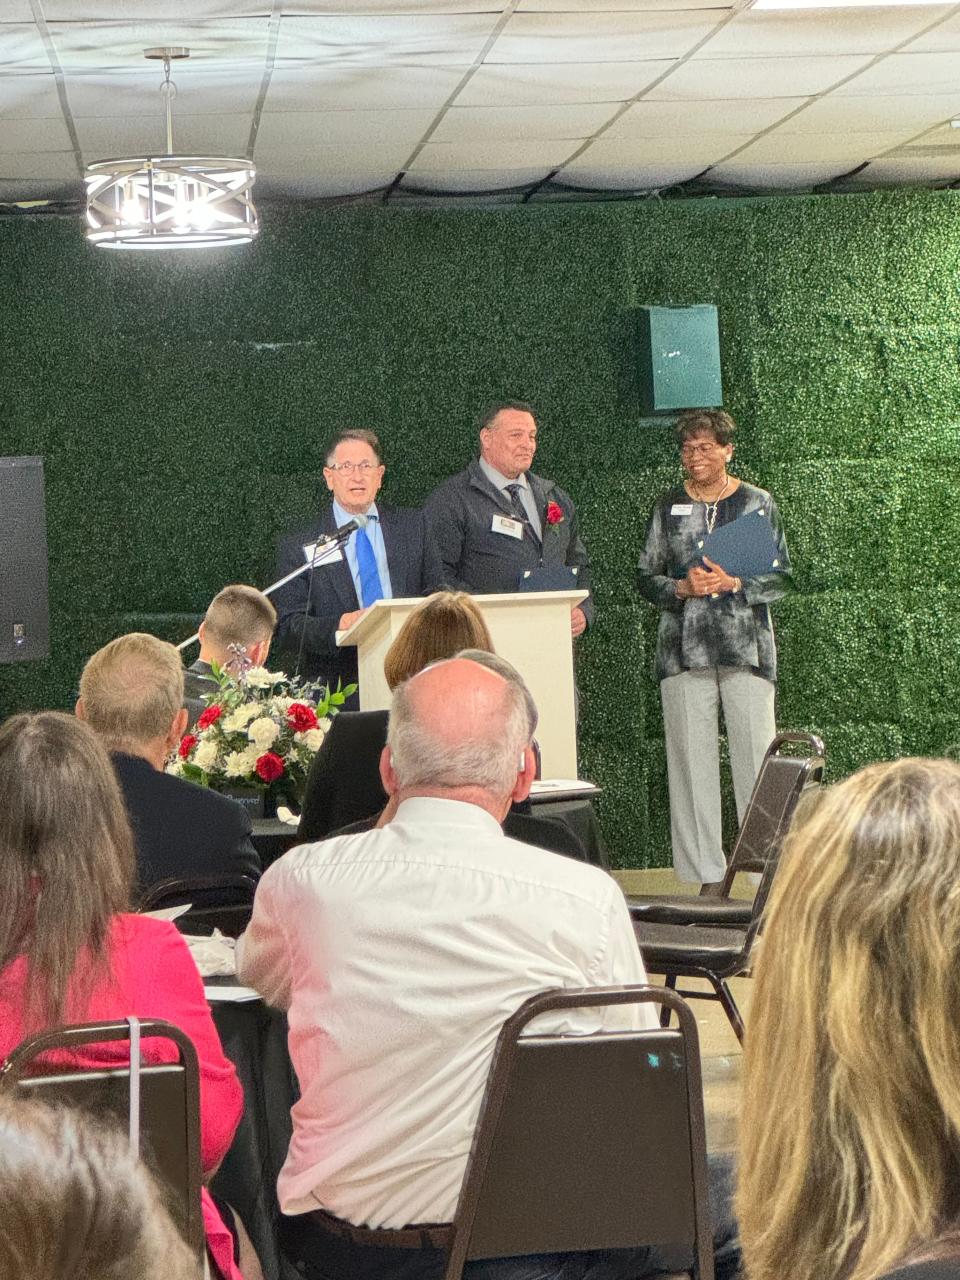 Edward Hastings, center, receives one of the Mary Brady Foundation scholarships that went to law students. Speaking is lawyer Joseph Albrechta, left, with Ohio Supreme Court Justice Melody Stewart on the right.